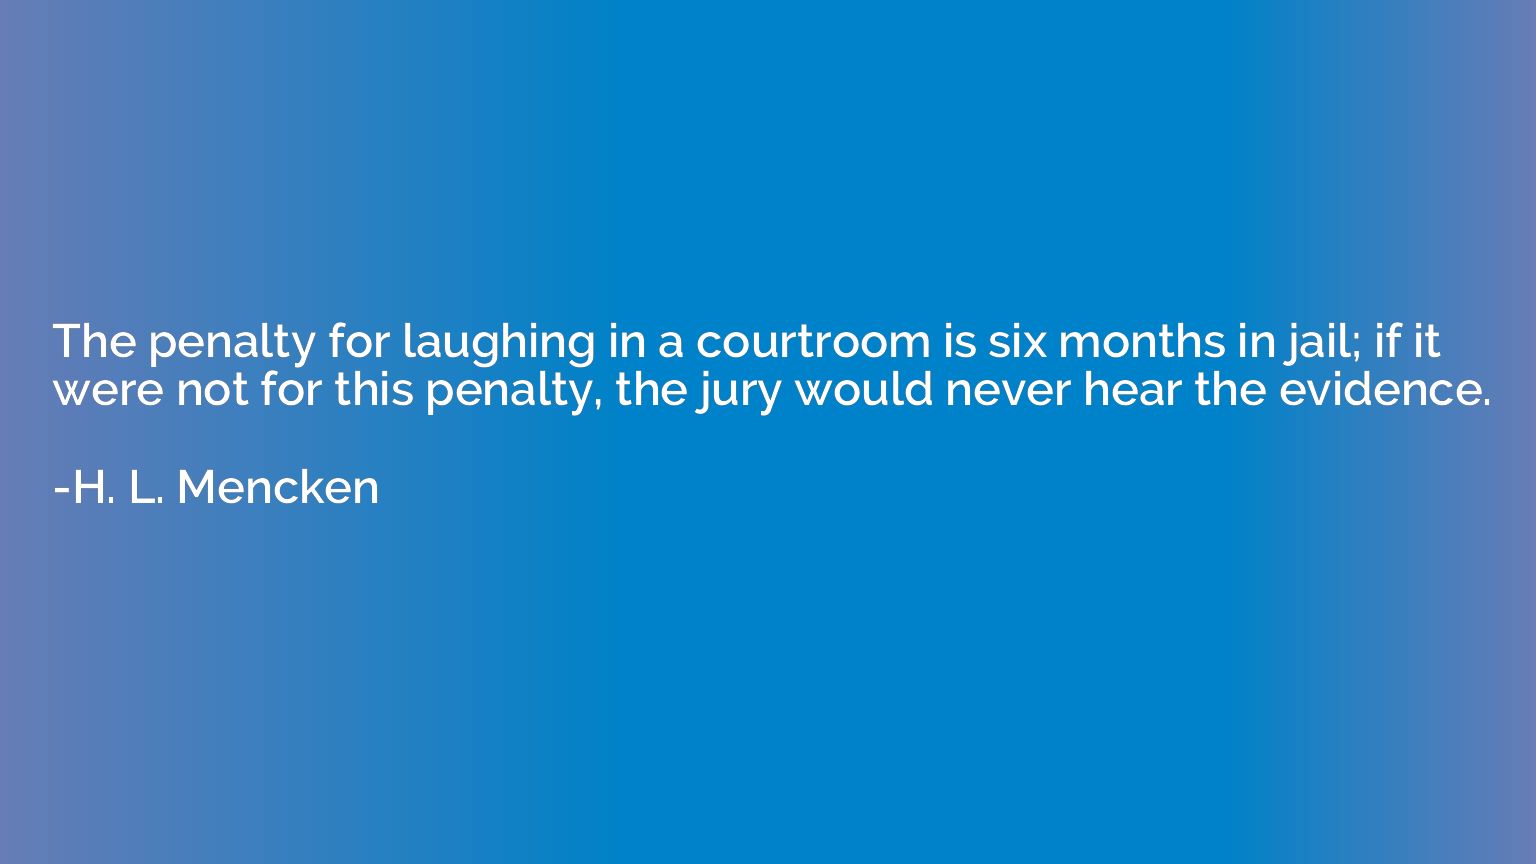 The penalty for laughing in a courtroom is six months in jai